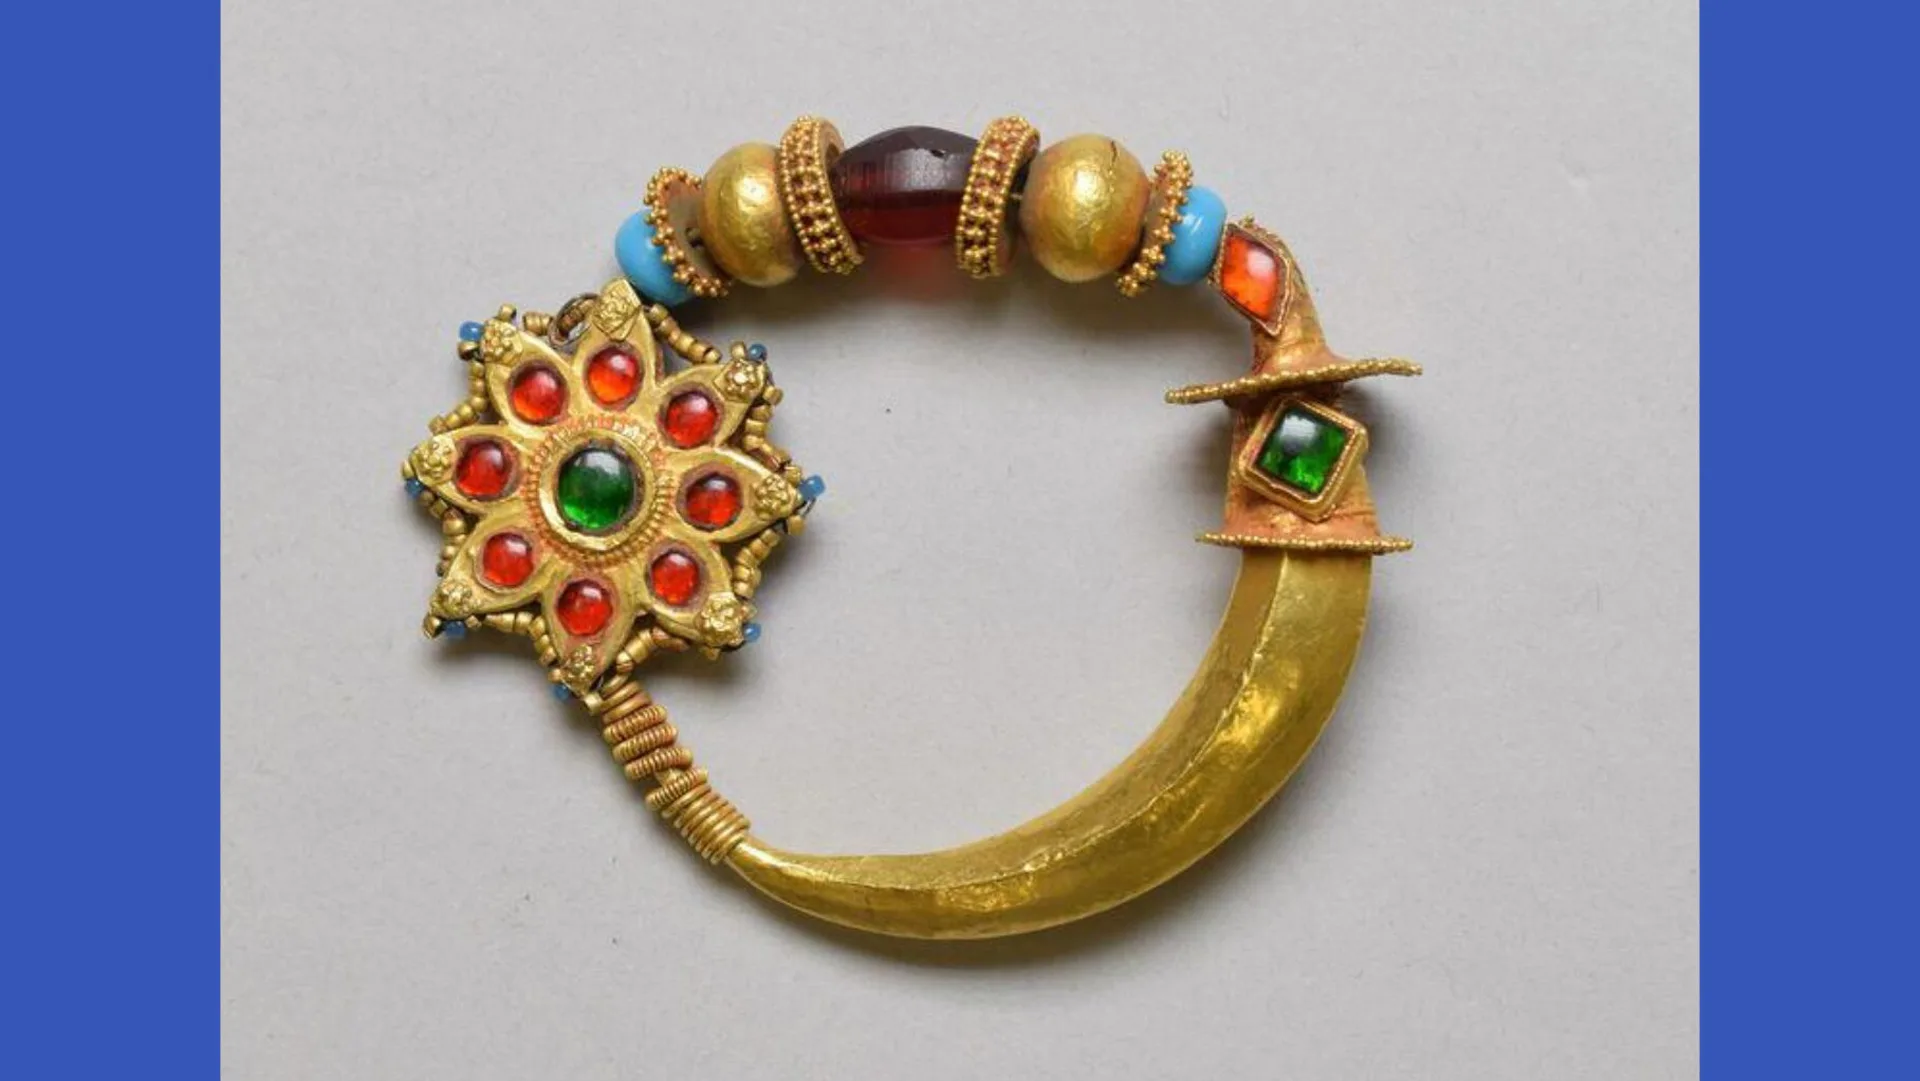 A photograph of a gold nose ring endorned with multi-coloured stones and beads against a grey background